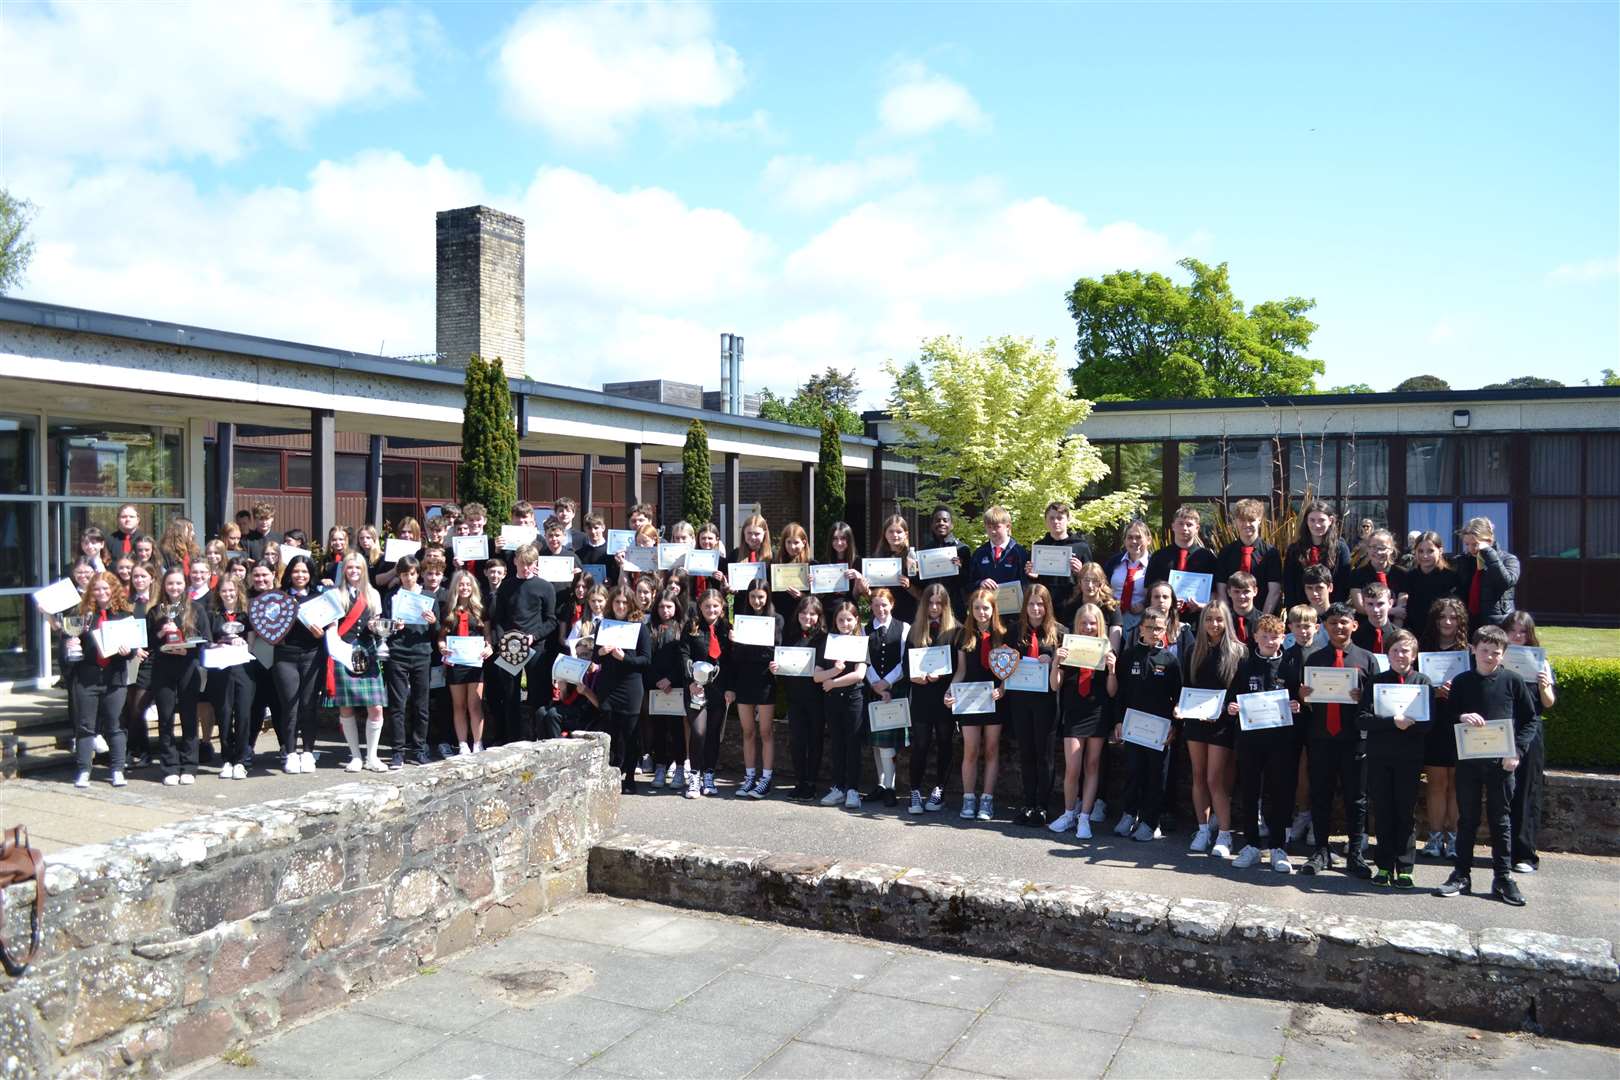 The school celebrated pupils’ achievements at an awards ceremony last month.